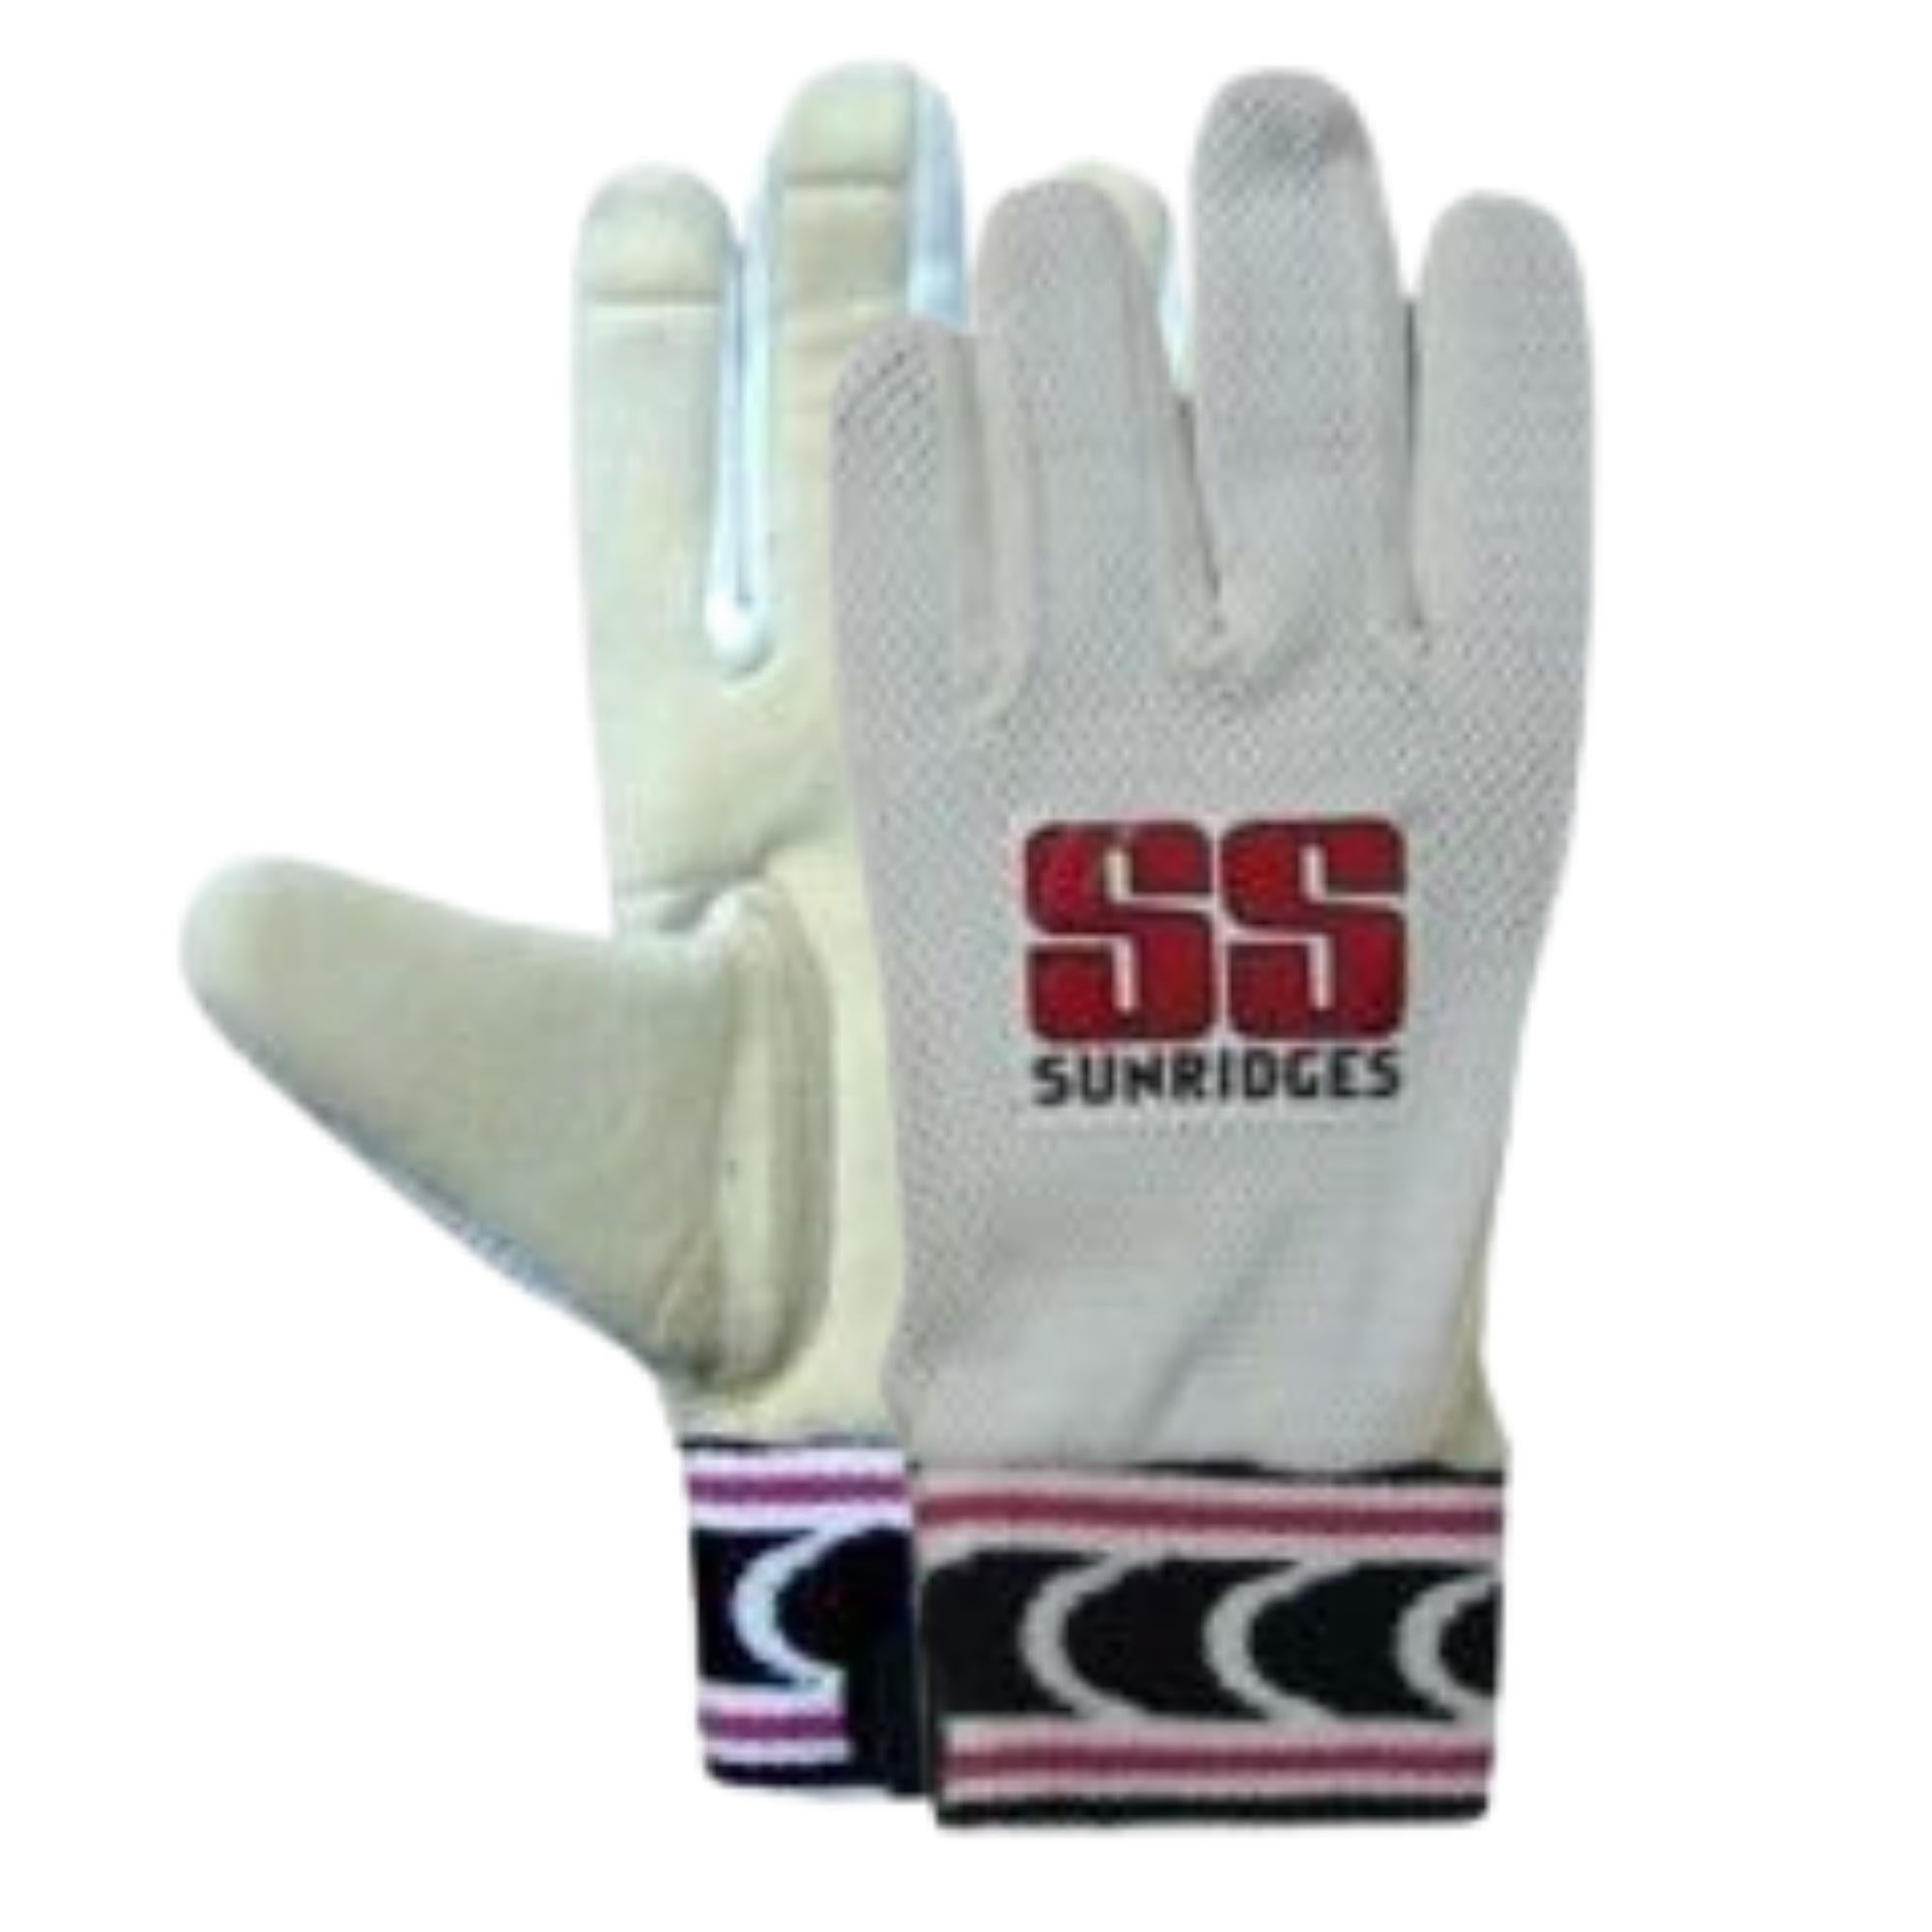 SS Test Wicket Keeping Gloves Inners